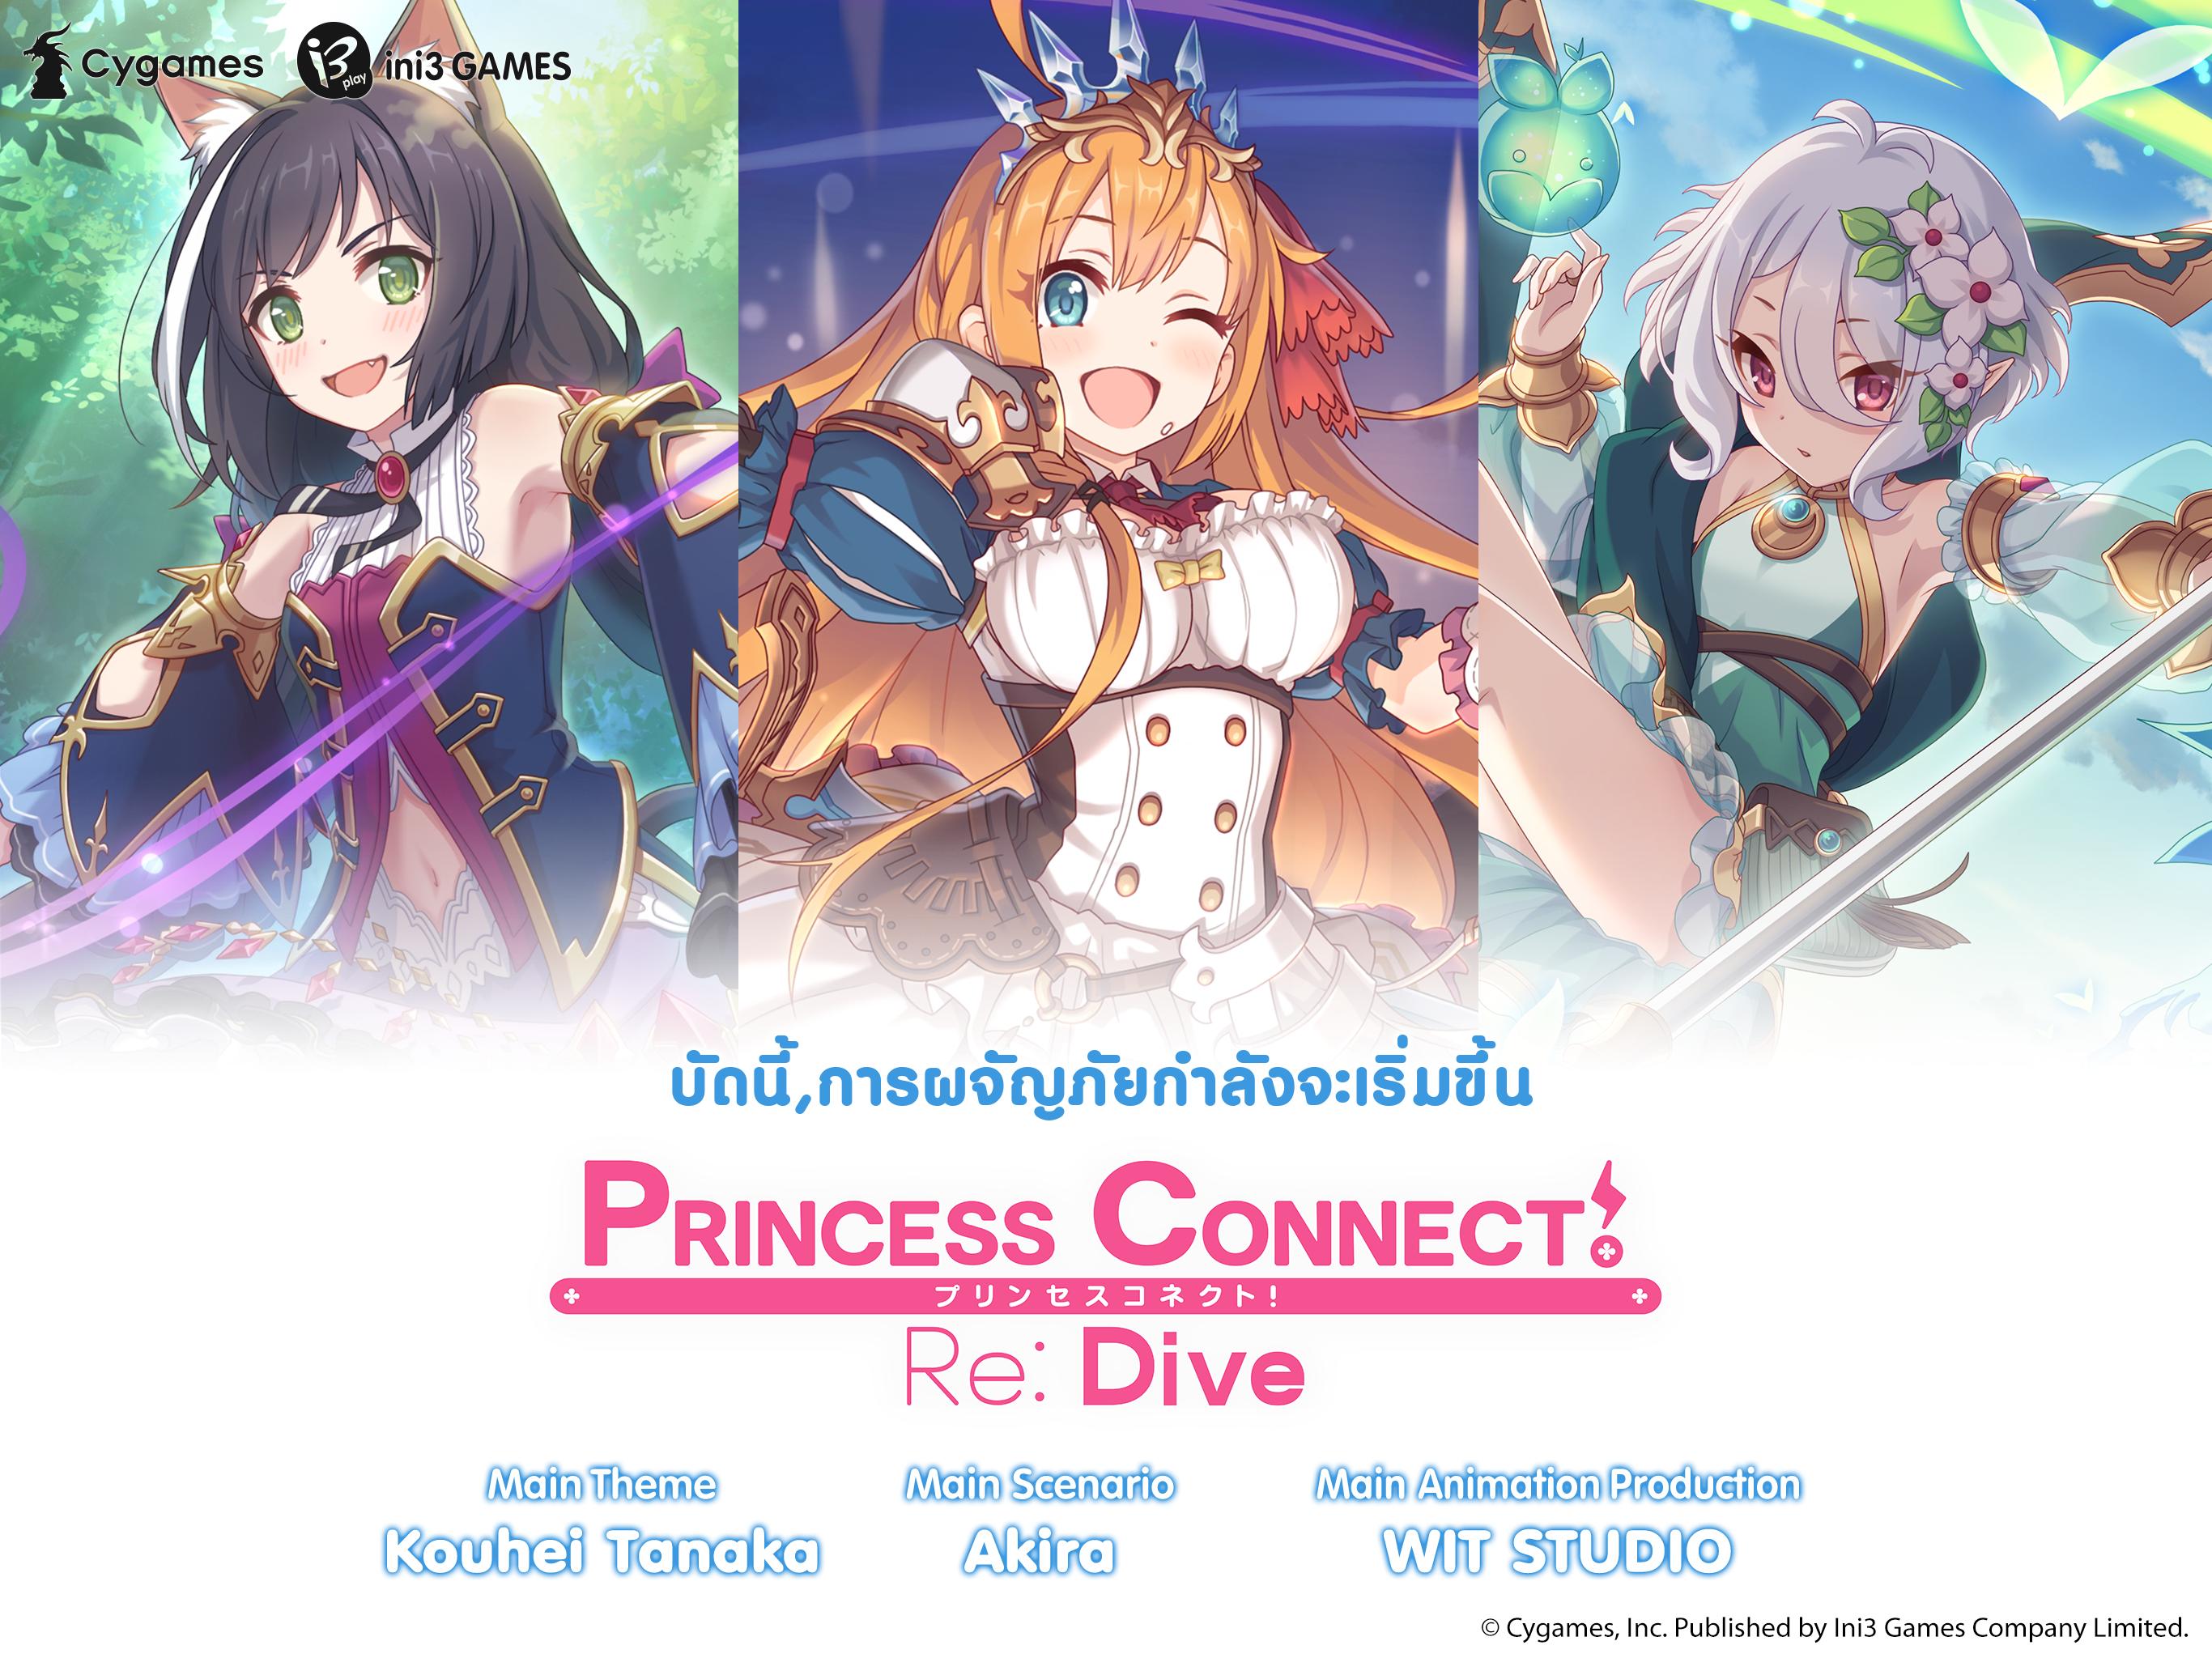 Princess Connect! Re: Dive for Android - APK Download